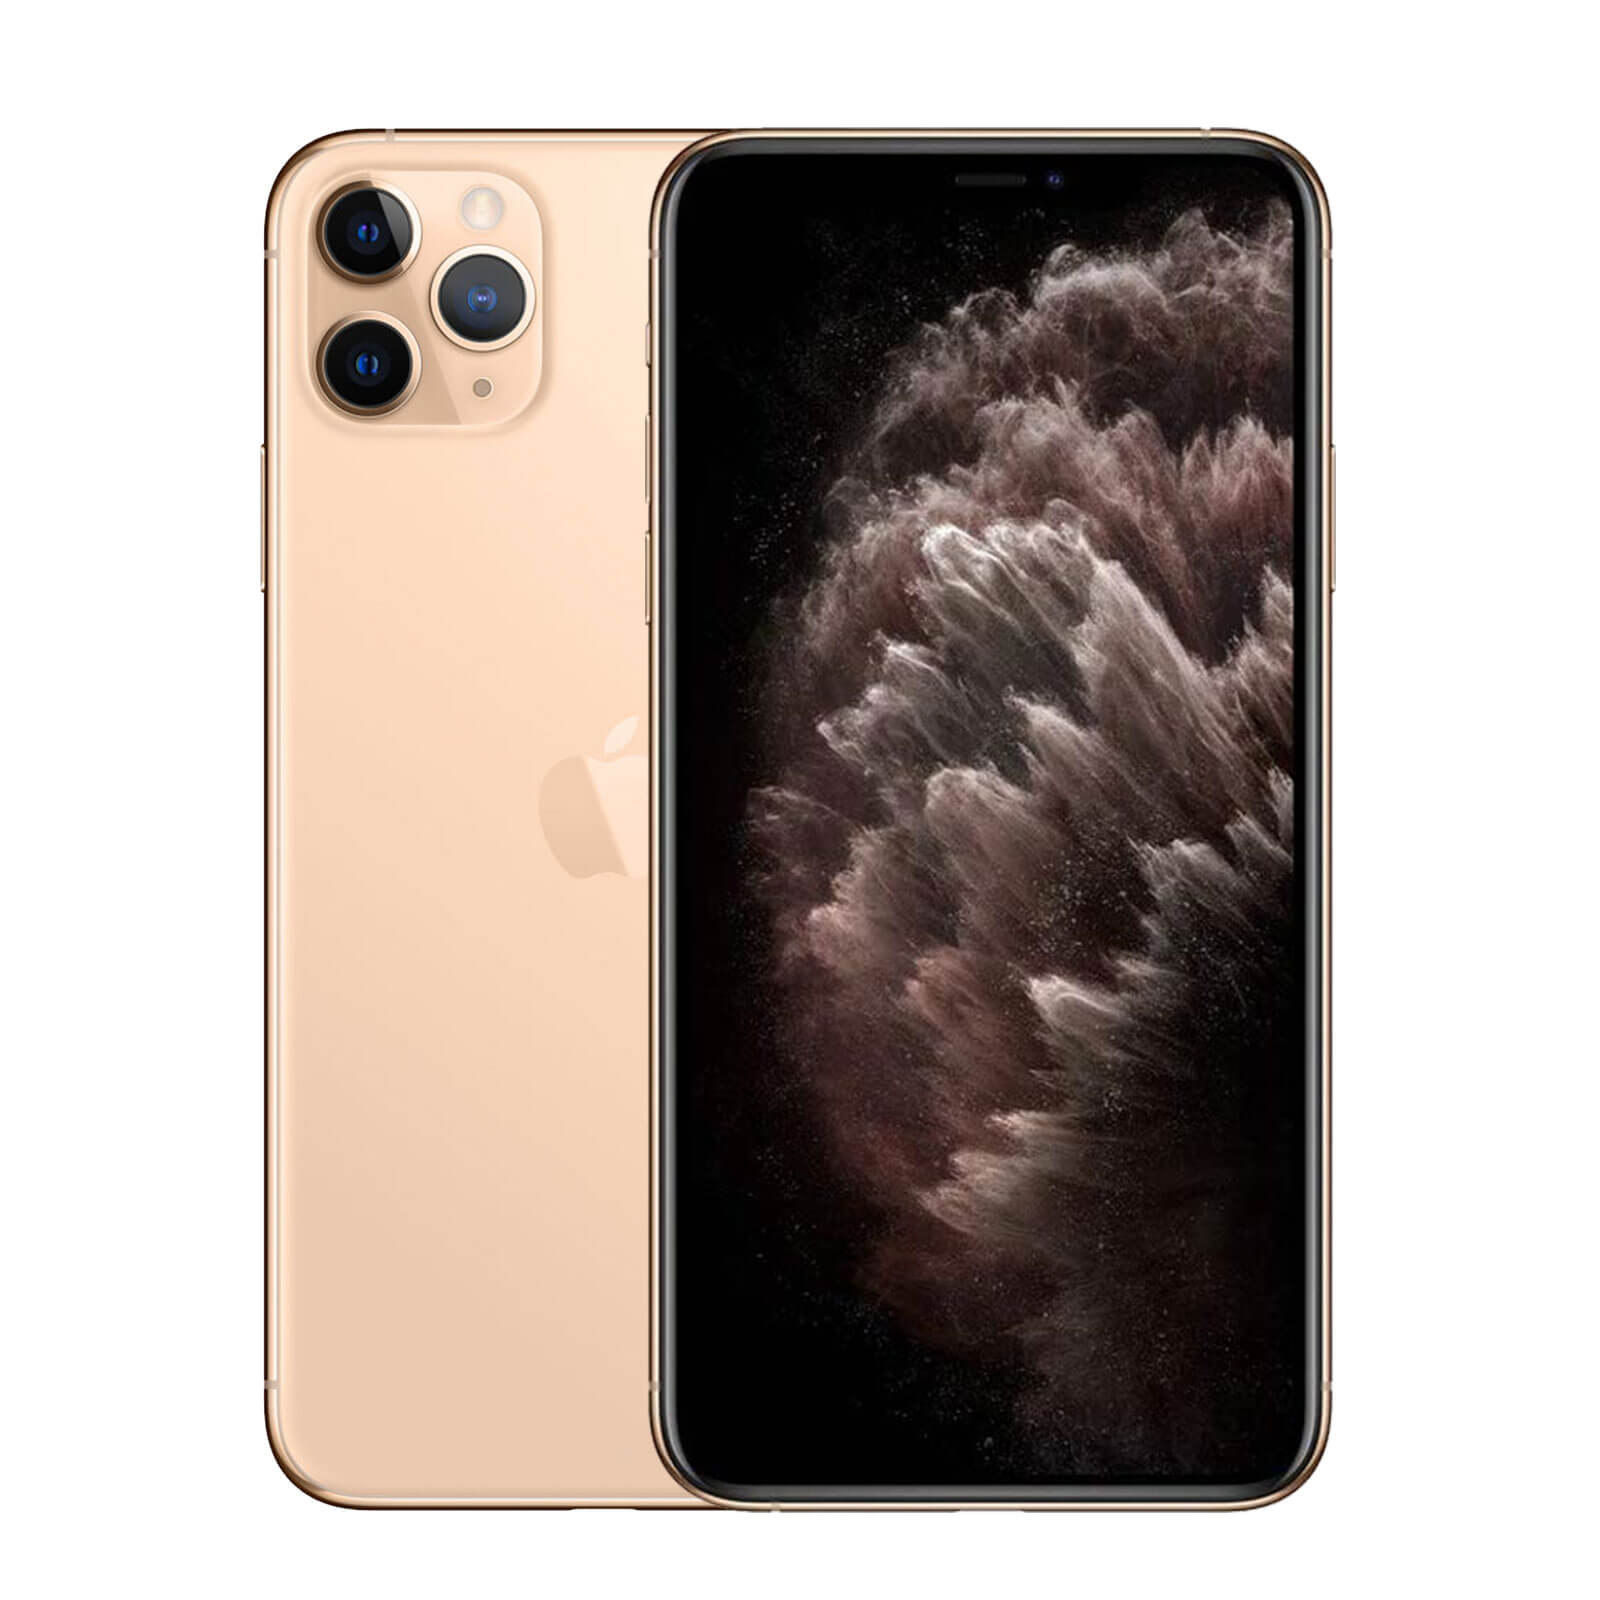 Apple iPhone 11 Pro Max 512GB Gold Good - T-Mobile